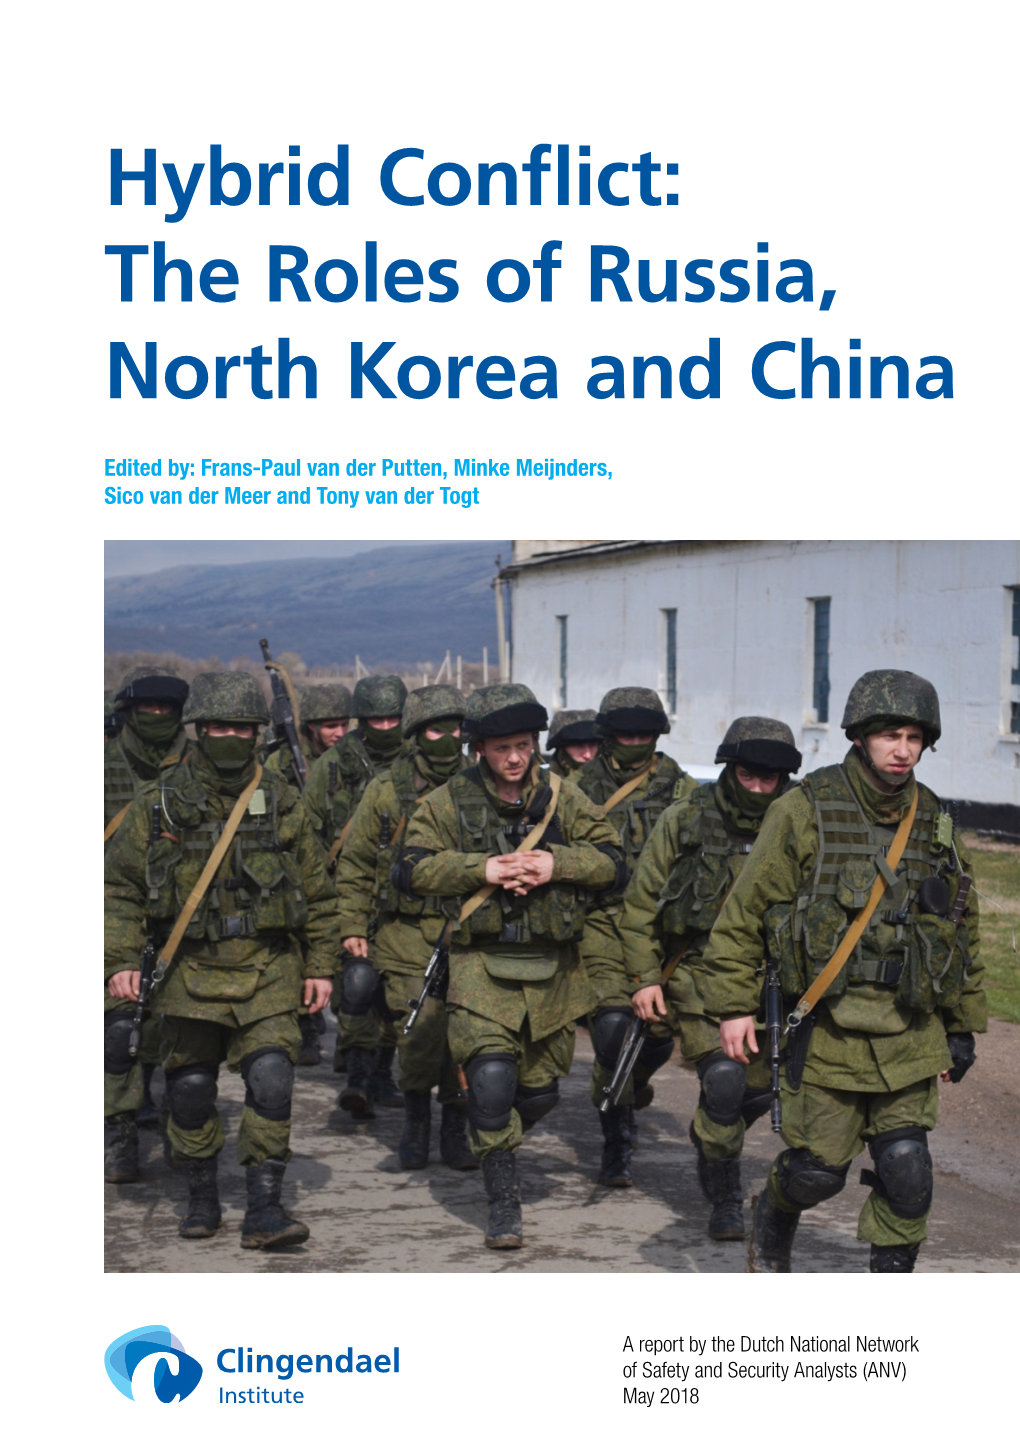 Hybrid Conflict: the Roles of Russia, North Korea and China